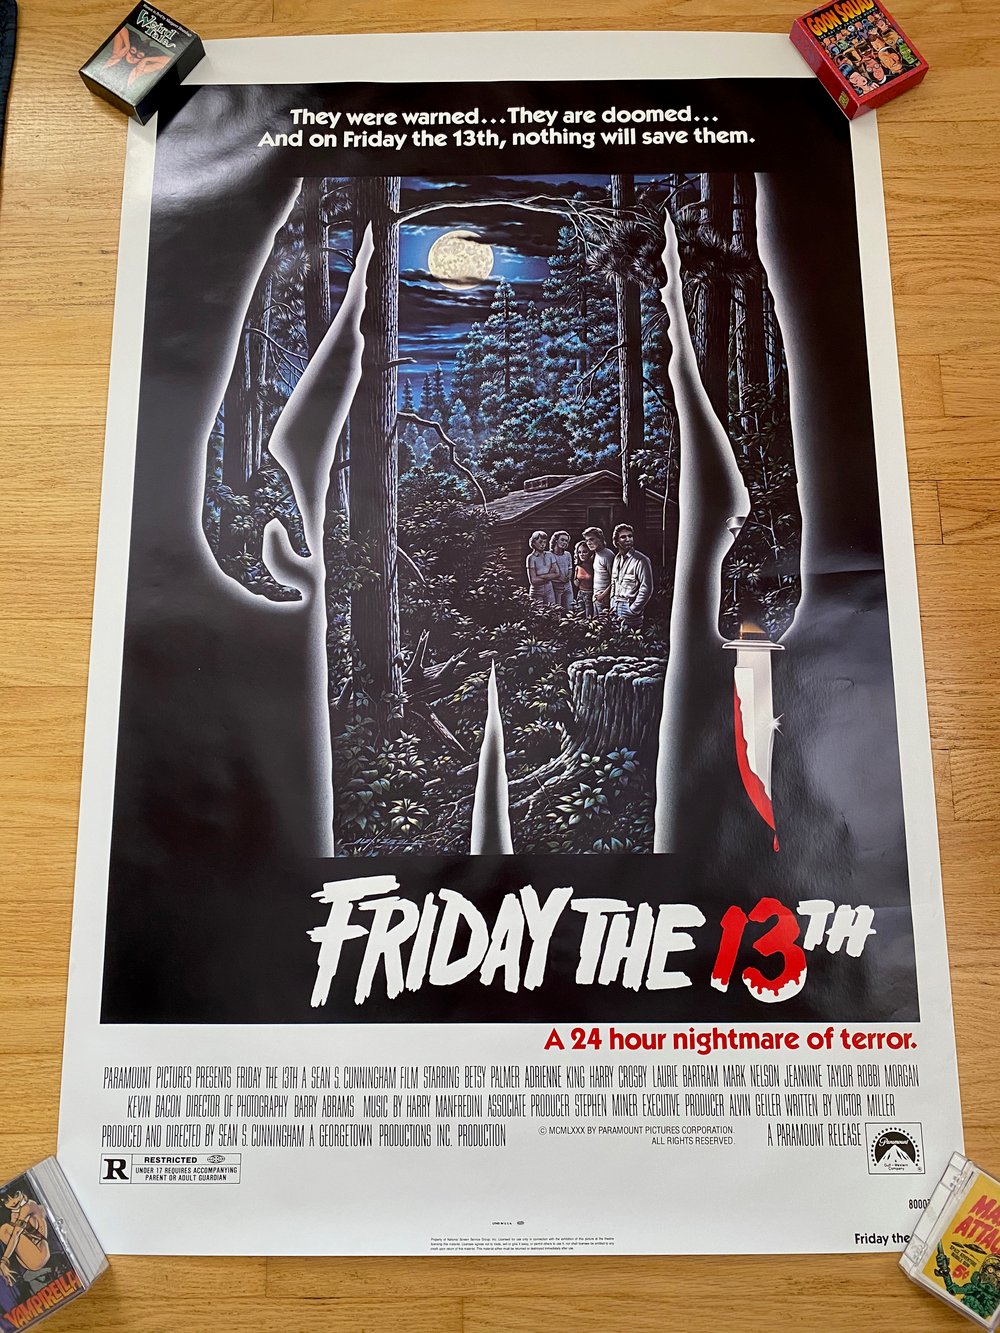 1980 Original FRIDAY THE 13th U.S. One Sheet Movie Poster